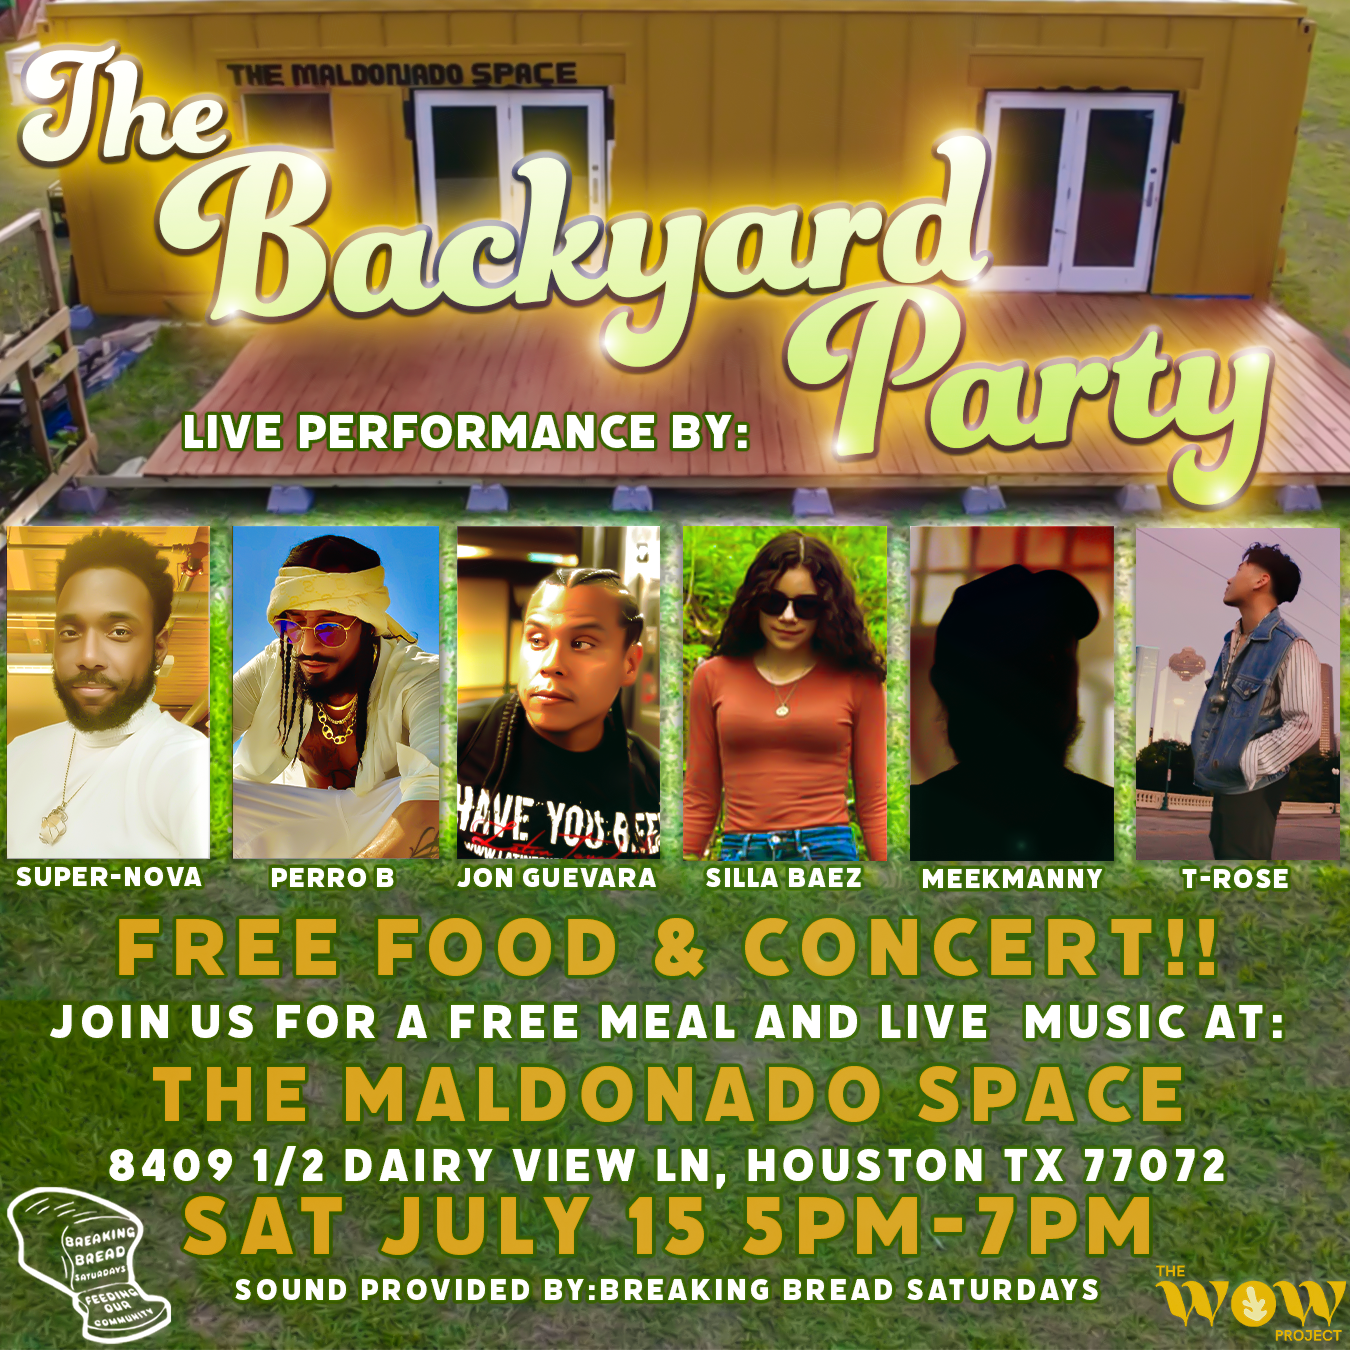 THE WOW PROJECT PRESENTS “THE BACK YARD PARTY”